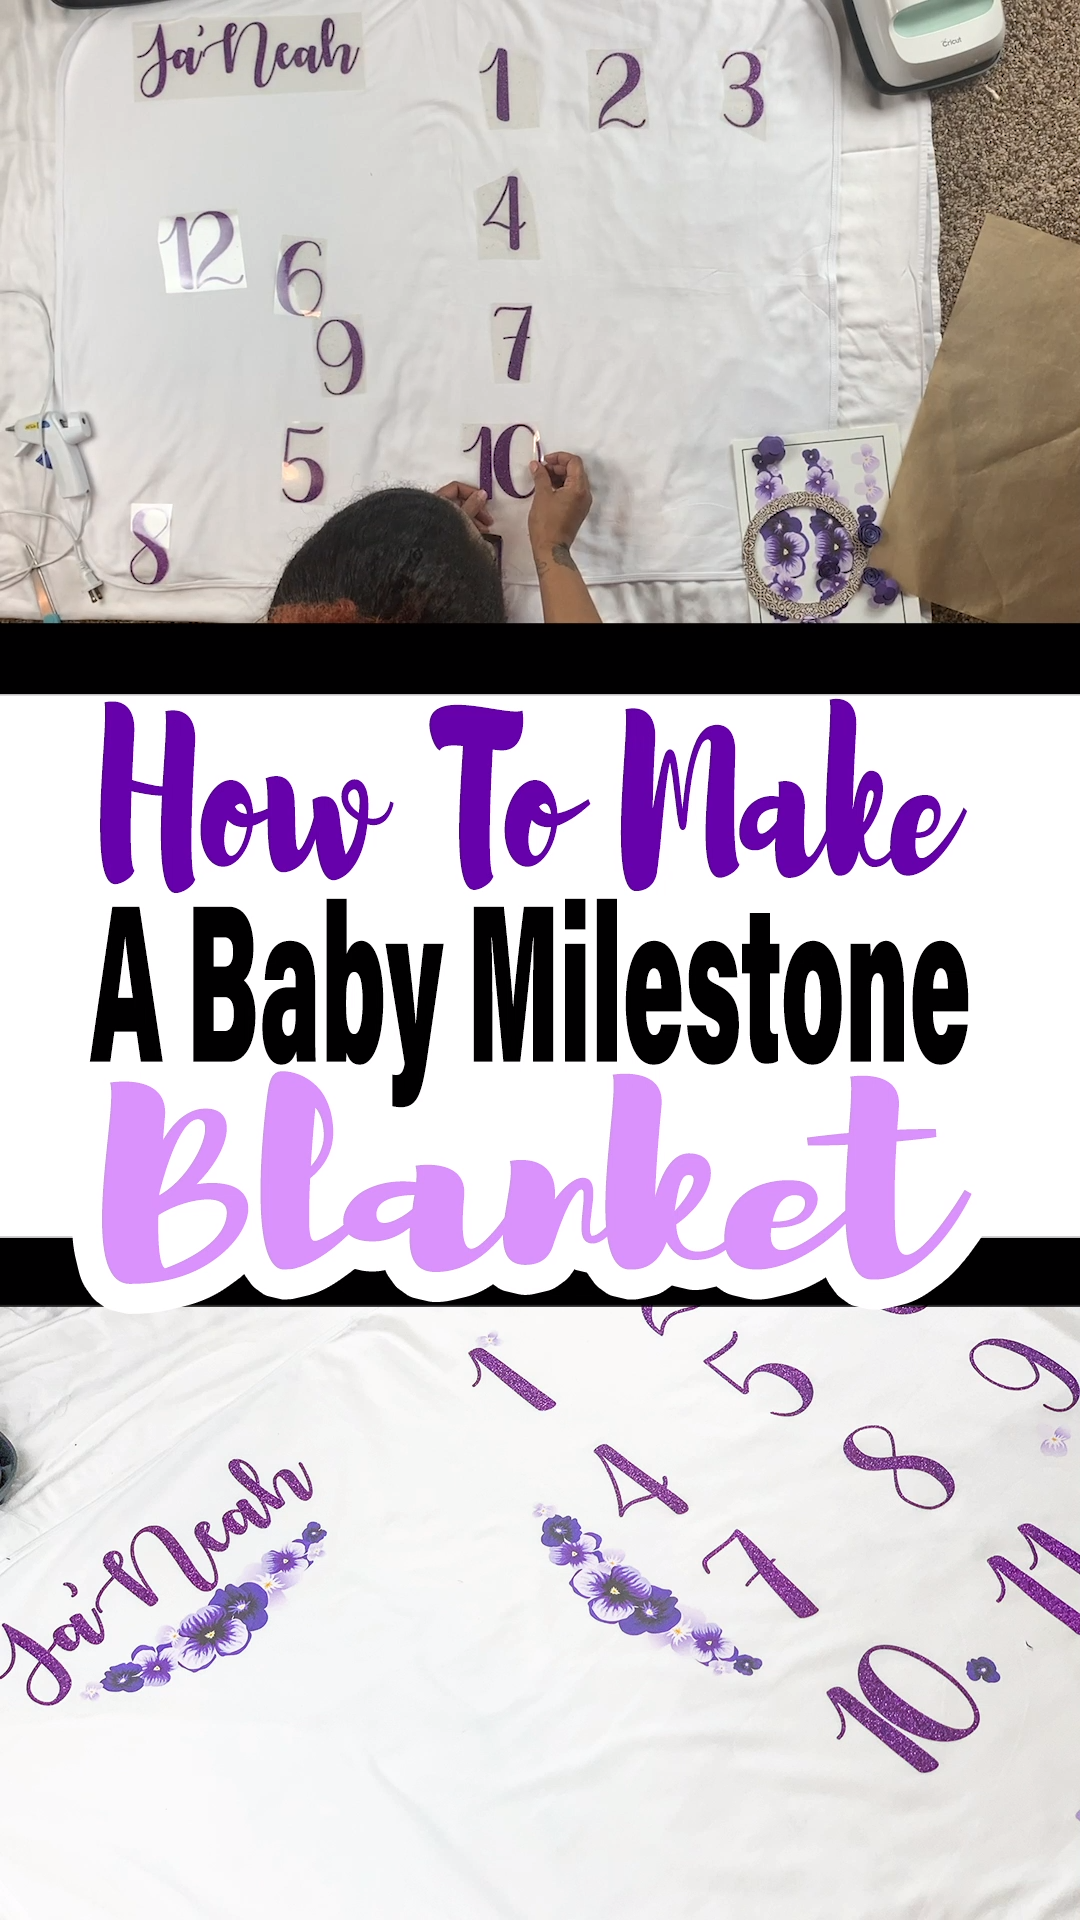 How To Make A Baby Milestone Blanket -   17 diy projects Baby craft ideas